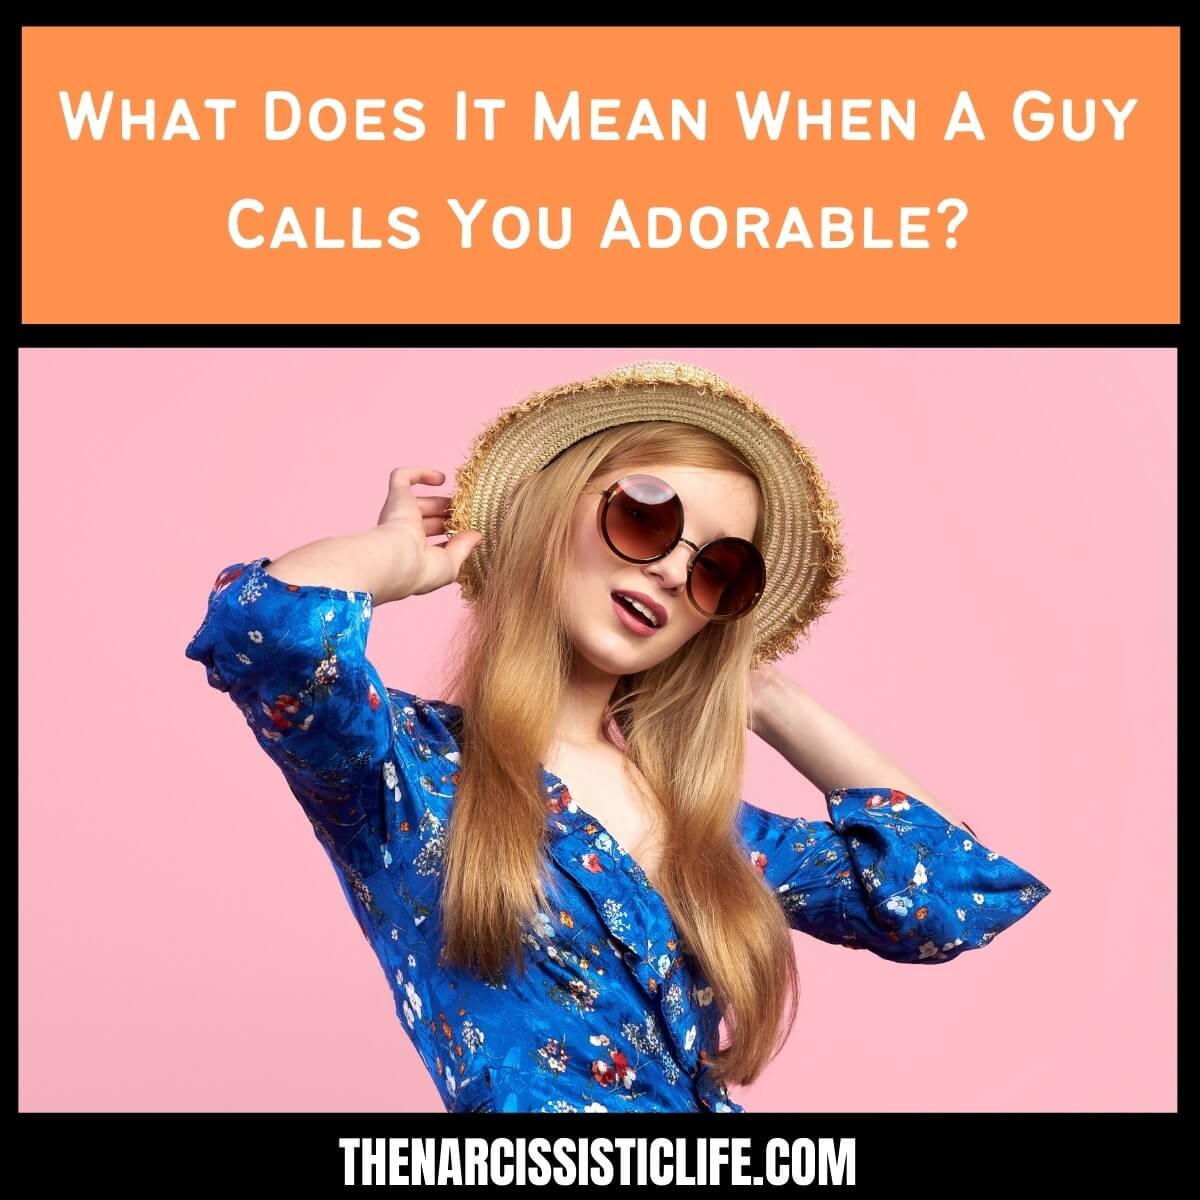 What Does It Mean When A Guy Calls You Adorable